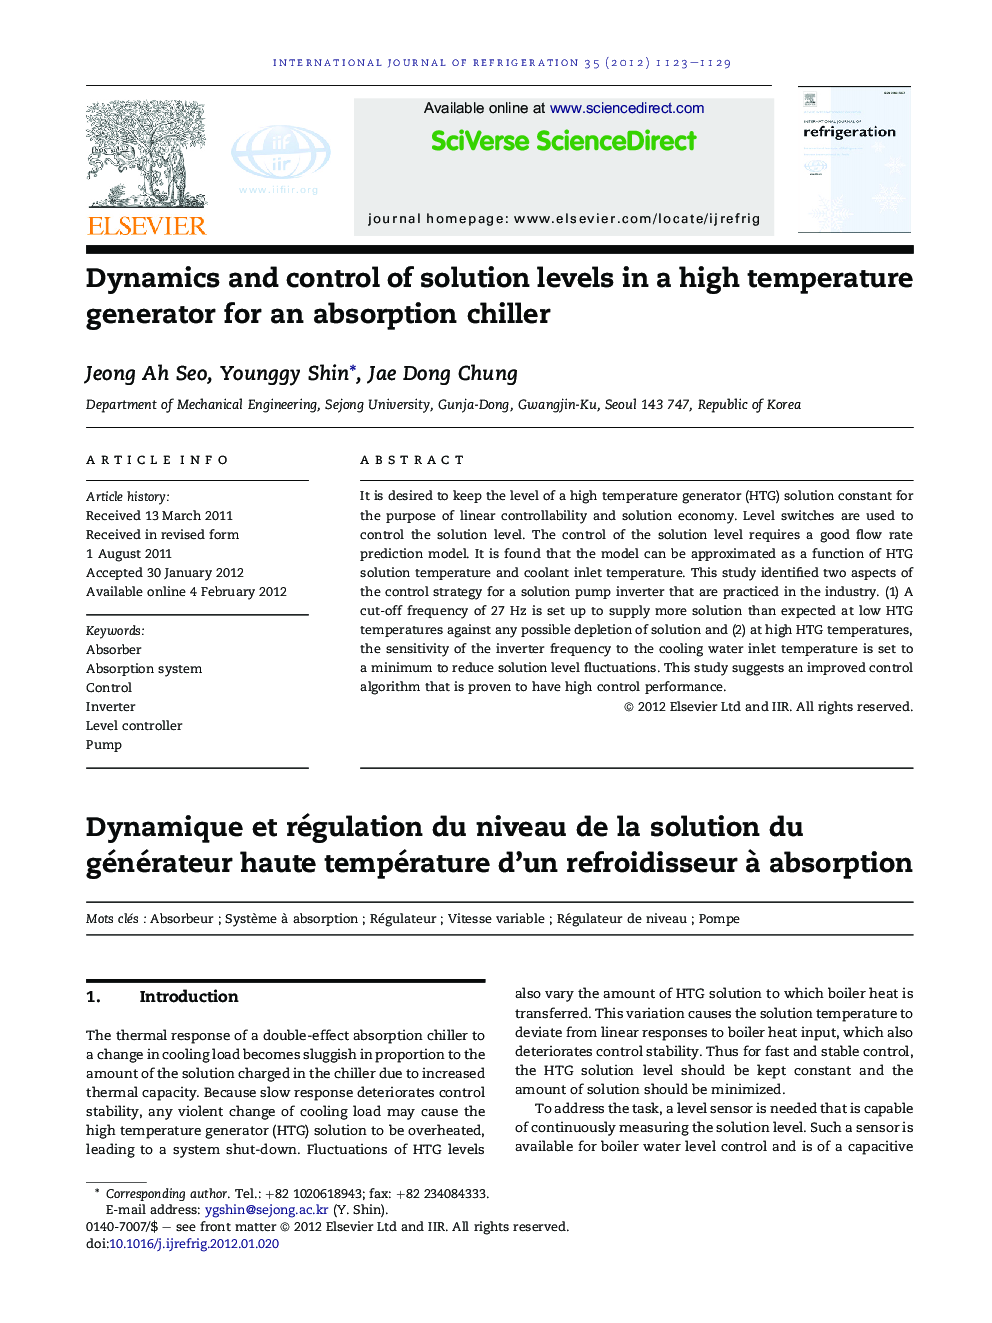 Dynamics and control of solution levels in a high temperature generator for an absorption chiller